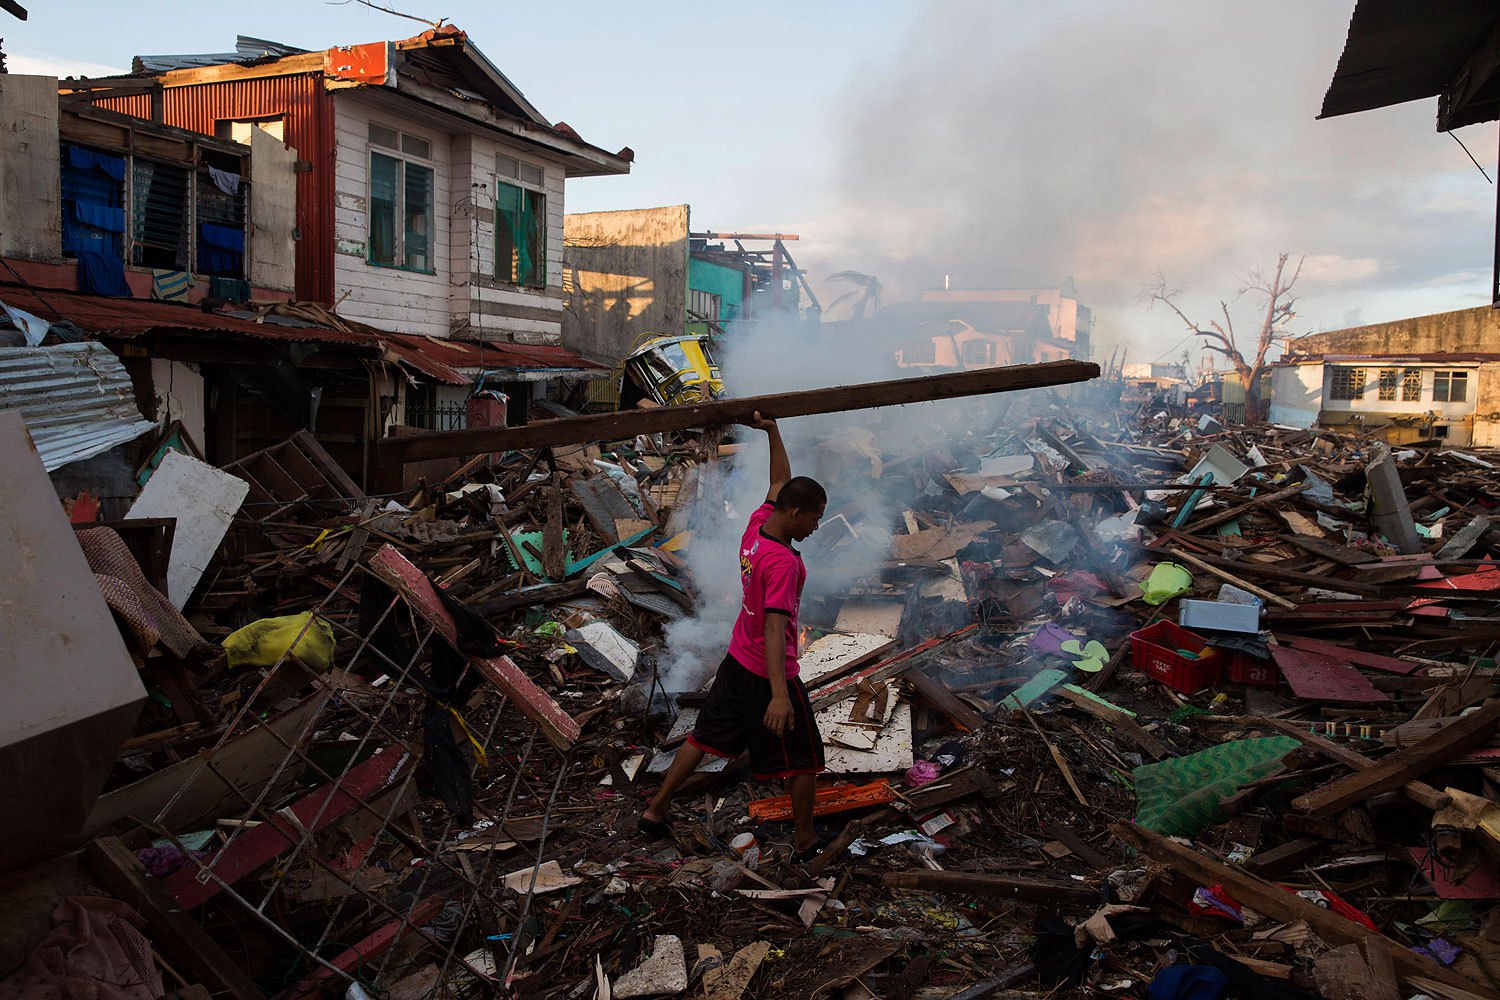 A man salvages wood in a neighbourhood destroyed by Typhoon Haiyan in Tacloban, Philippines on November 17, 2013.